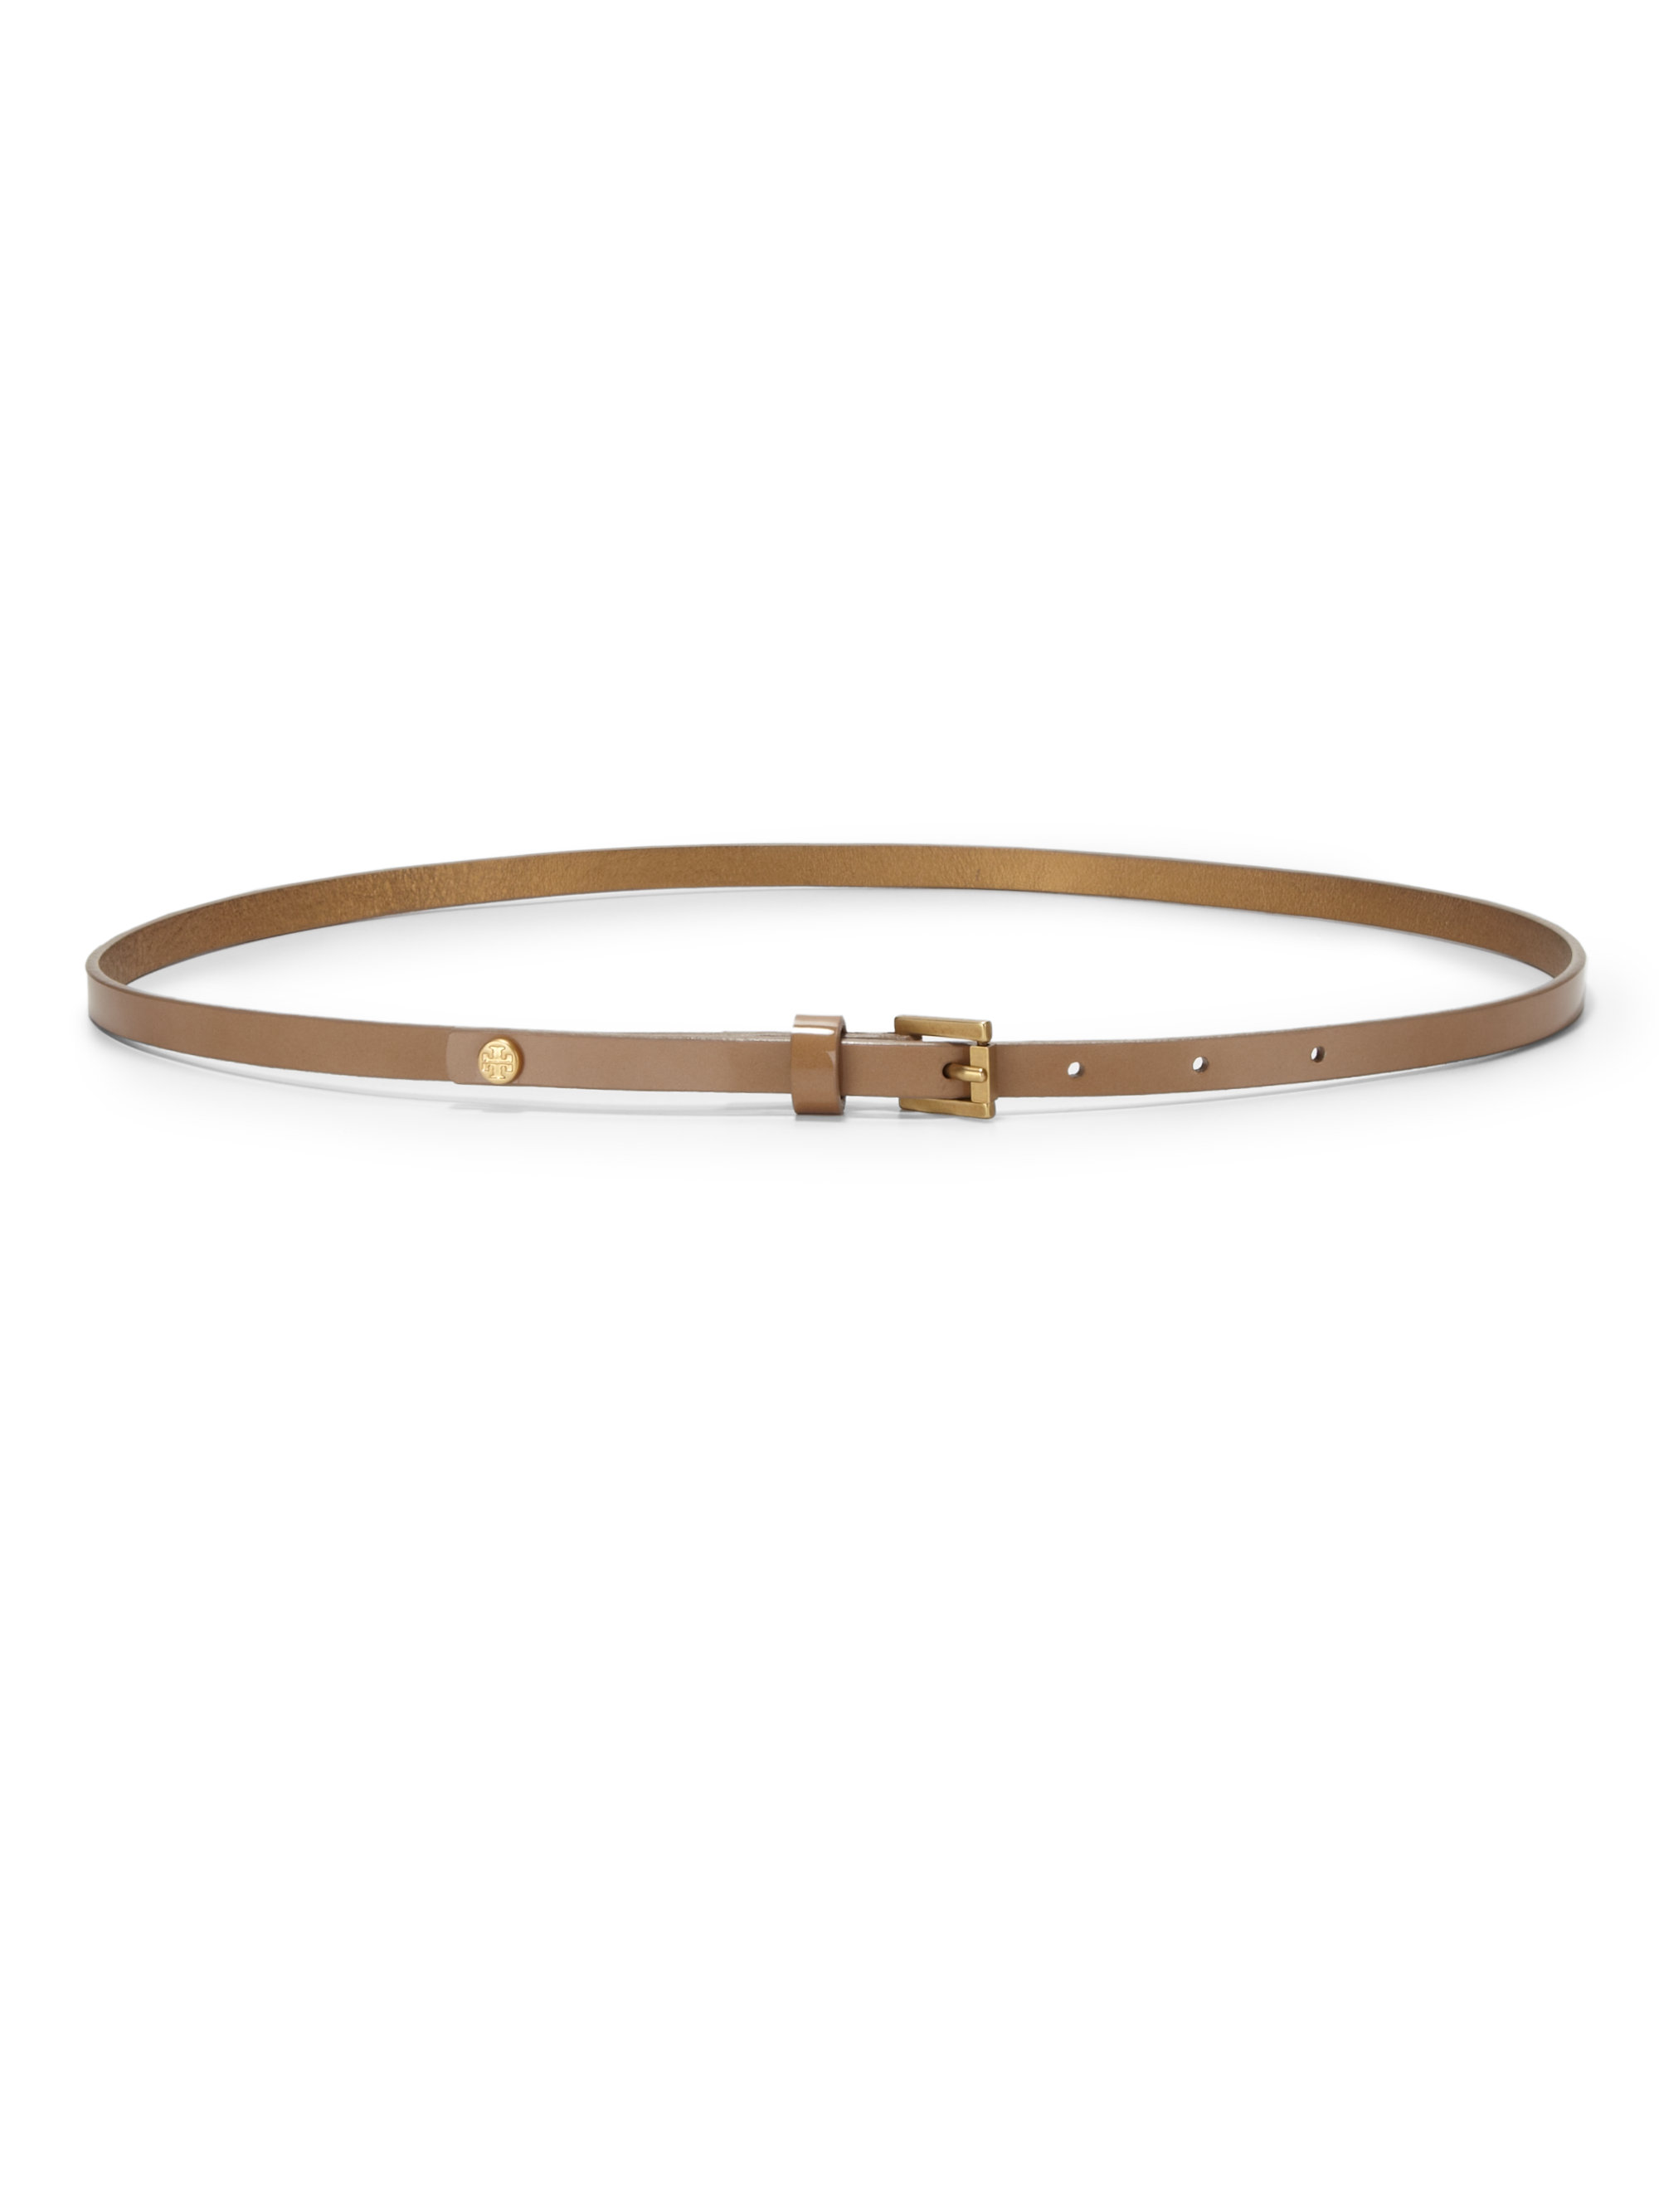 Tory Burch Skinny Patent Leather Belt in Brown (TAN) | Lyst